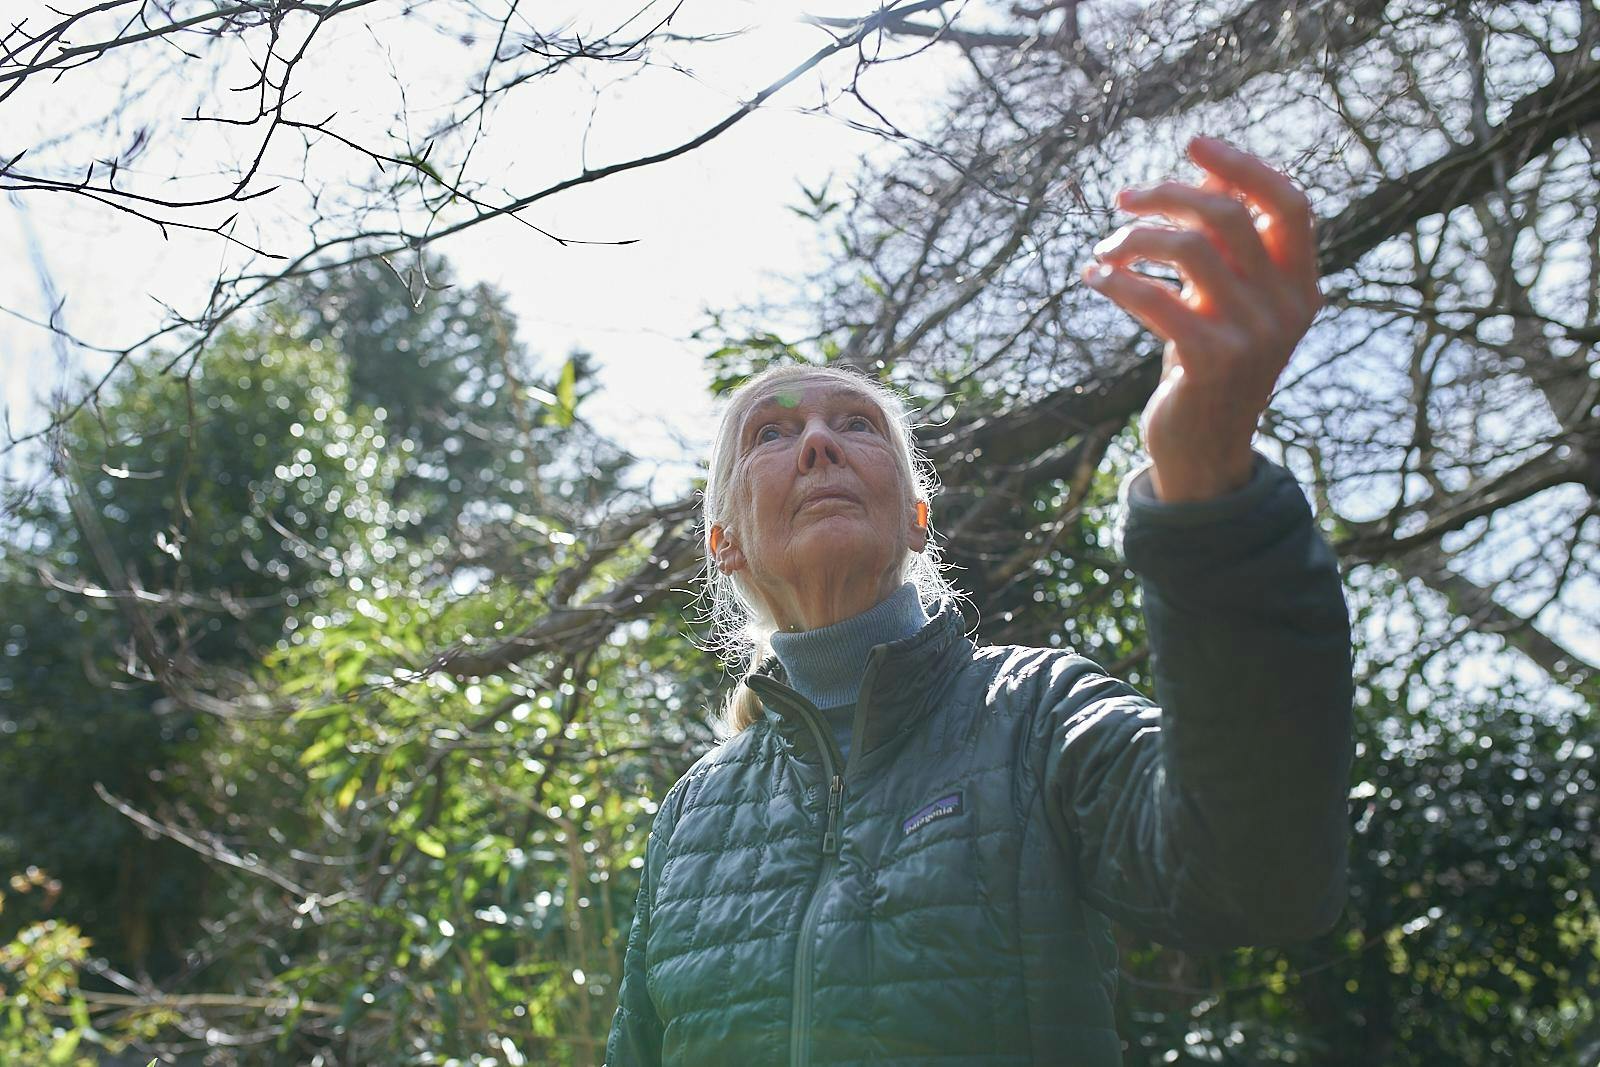 TWCF and National Geographic announce new grant in honor of Templeton Prize winner Jane Goodall